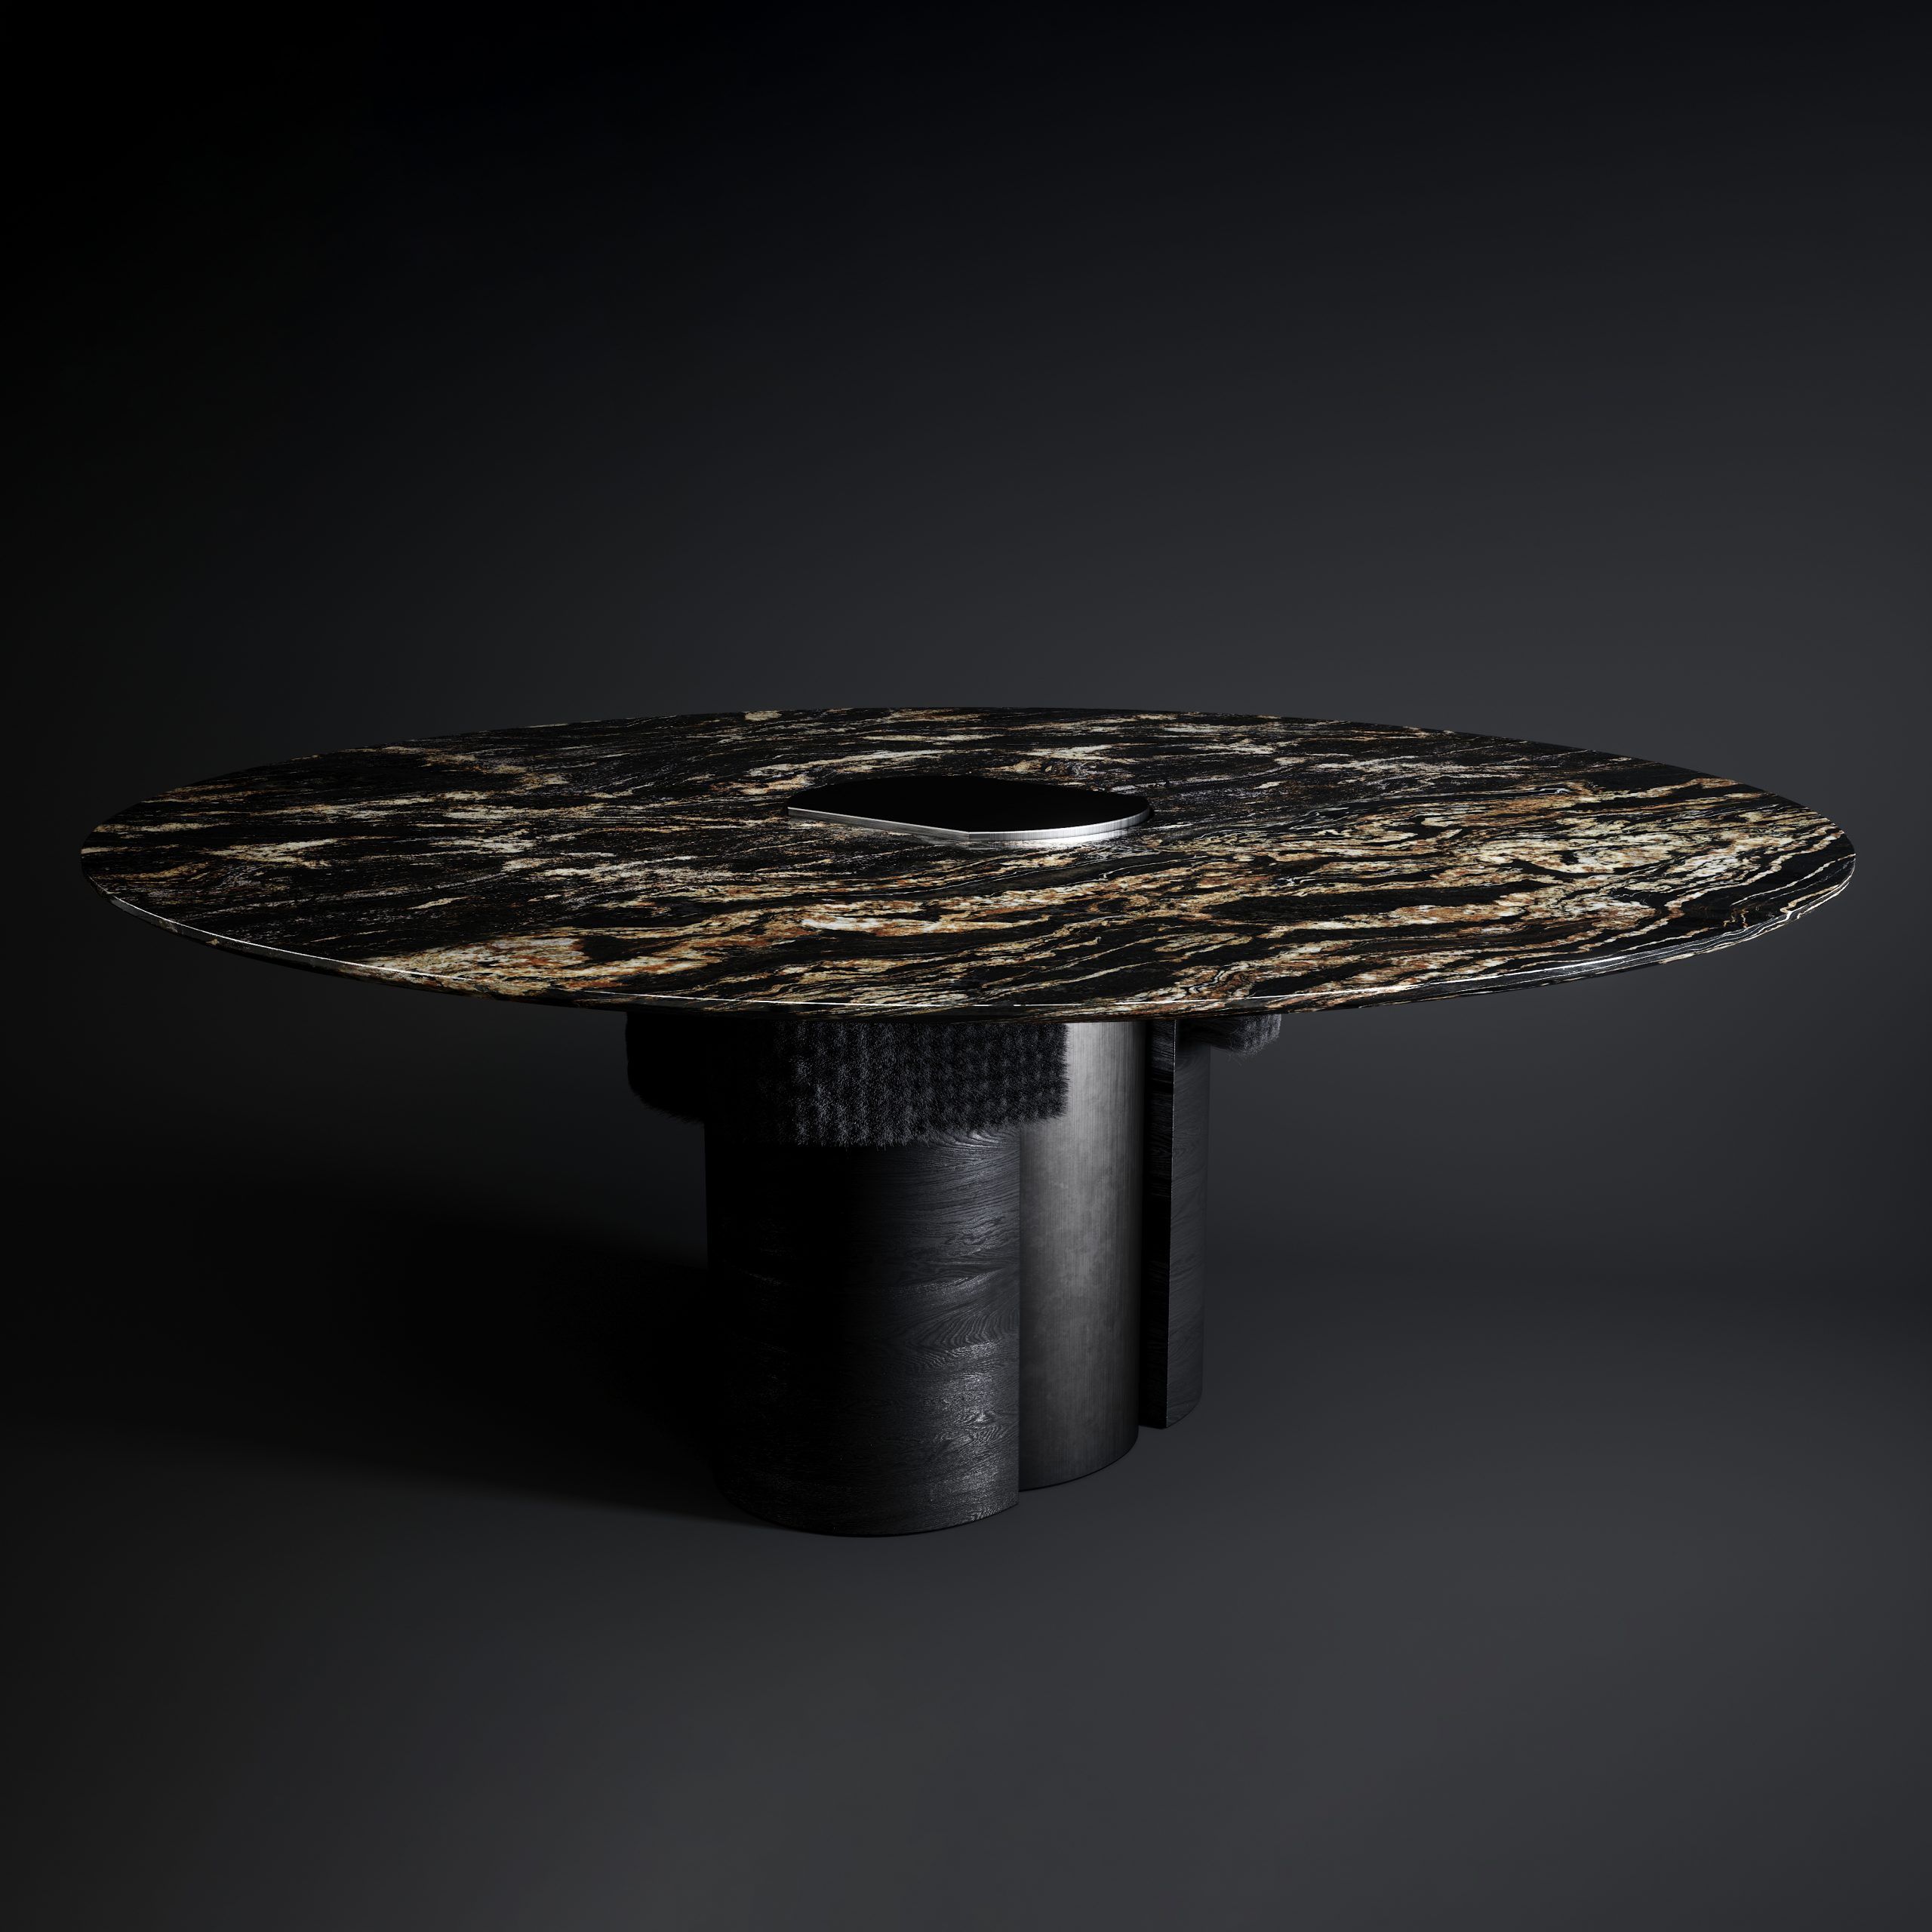 © Ad Hoc 'Roots Table Black' courtesy ammann//gallery